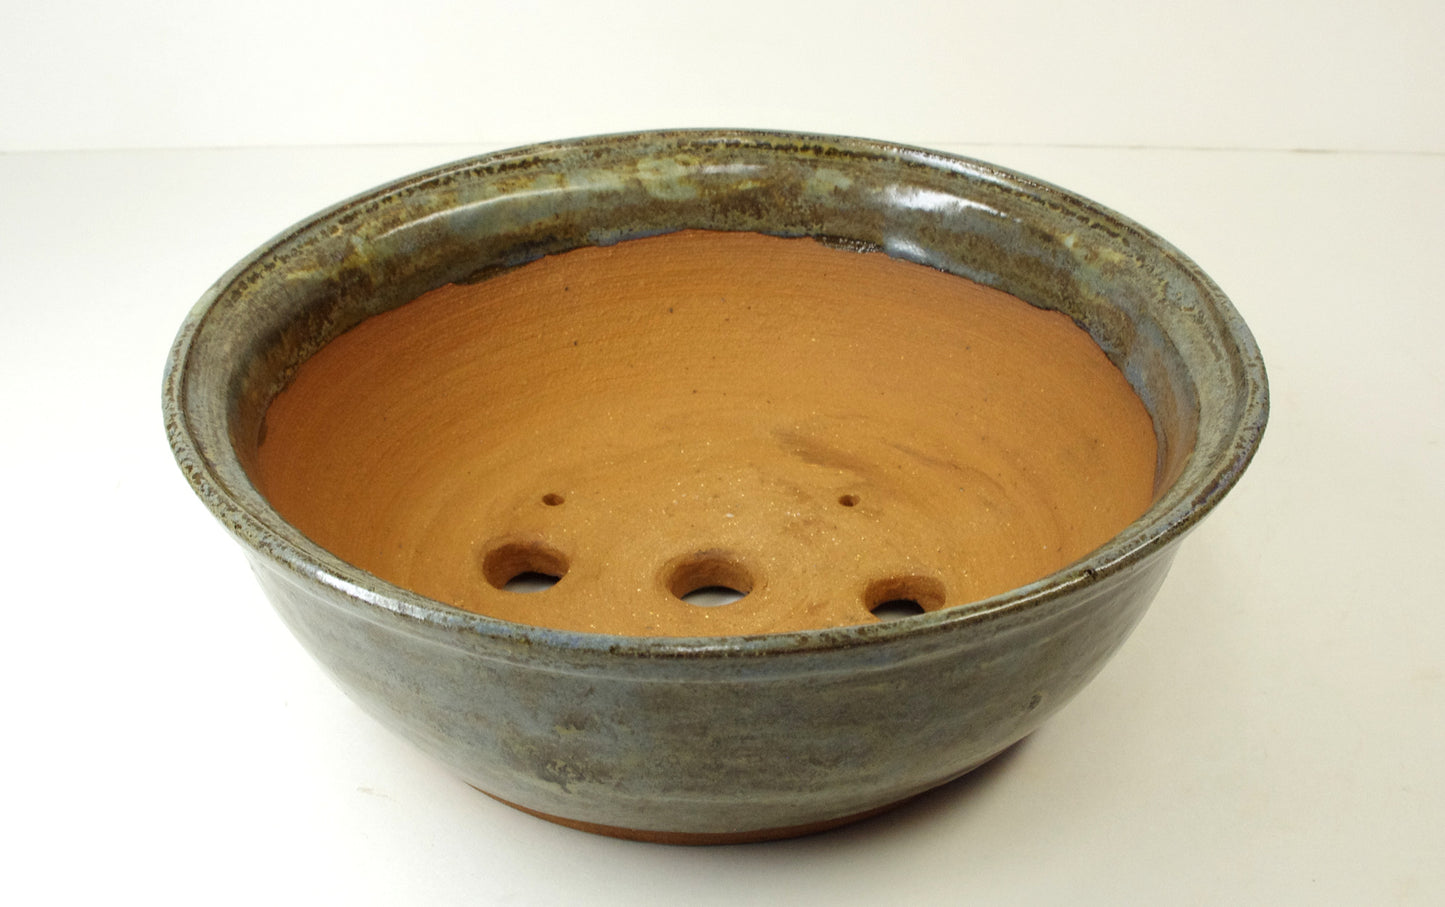 2083, Hand Thrown Stoneware Bonsai Pot, Extra Wire Holes, Blues, Greens, Browns, 8 1/8 x 2 7/8